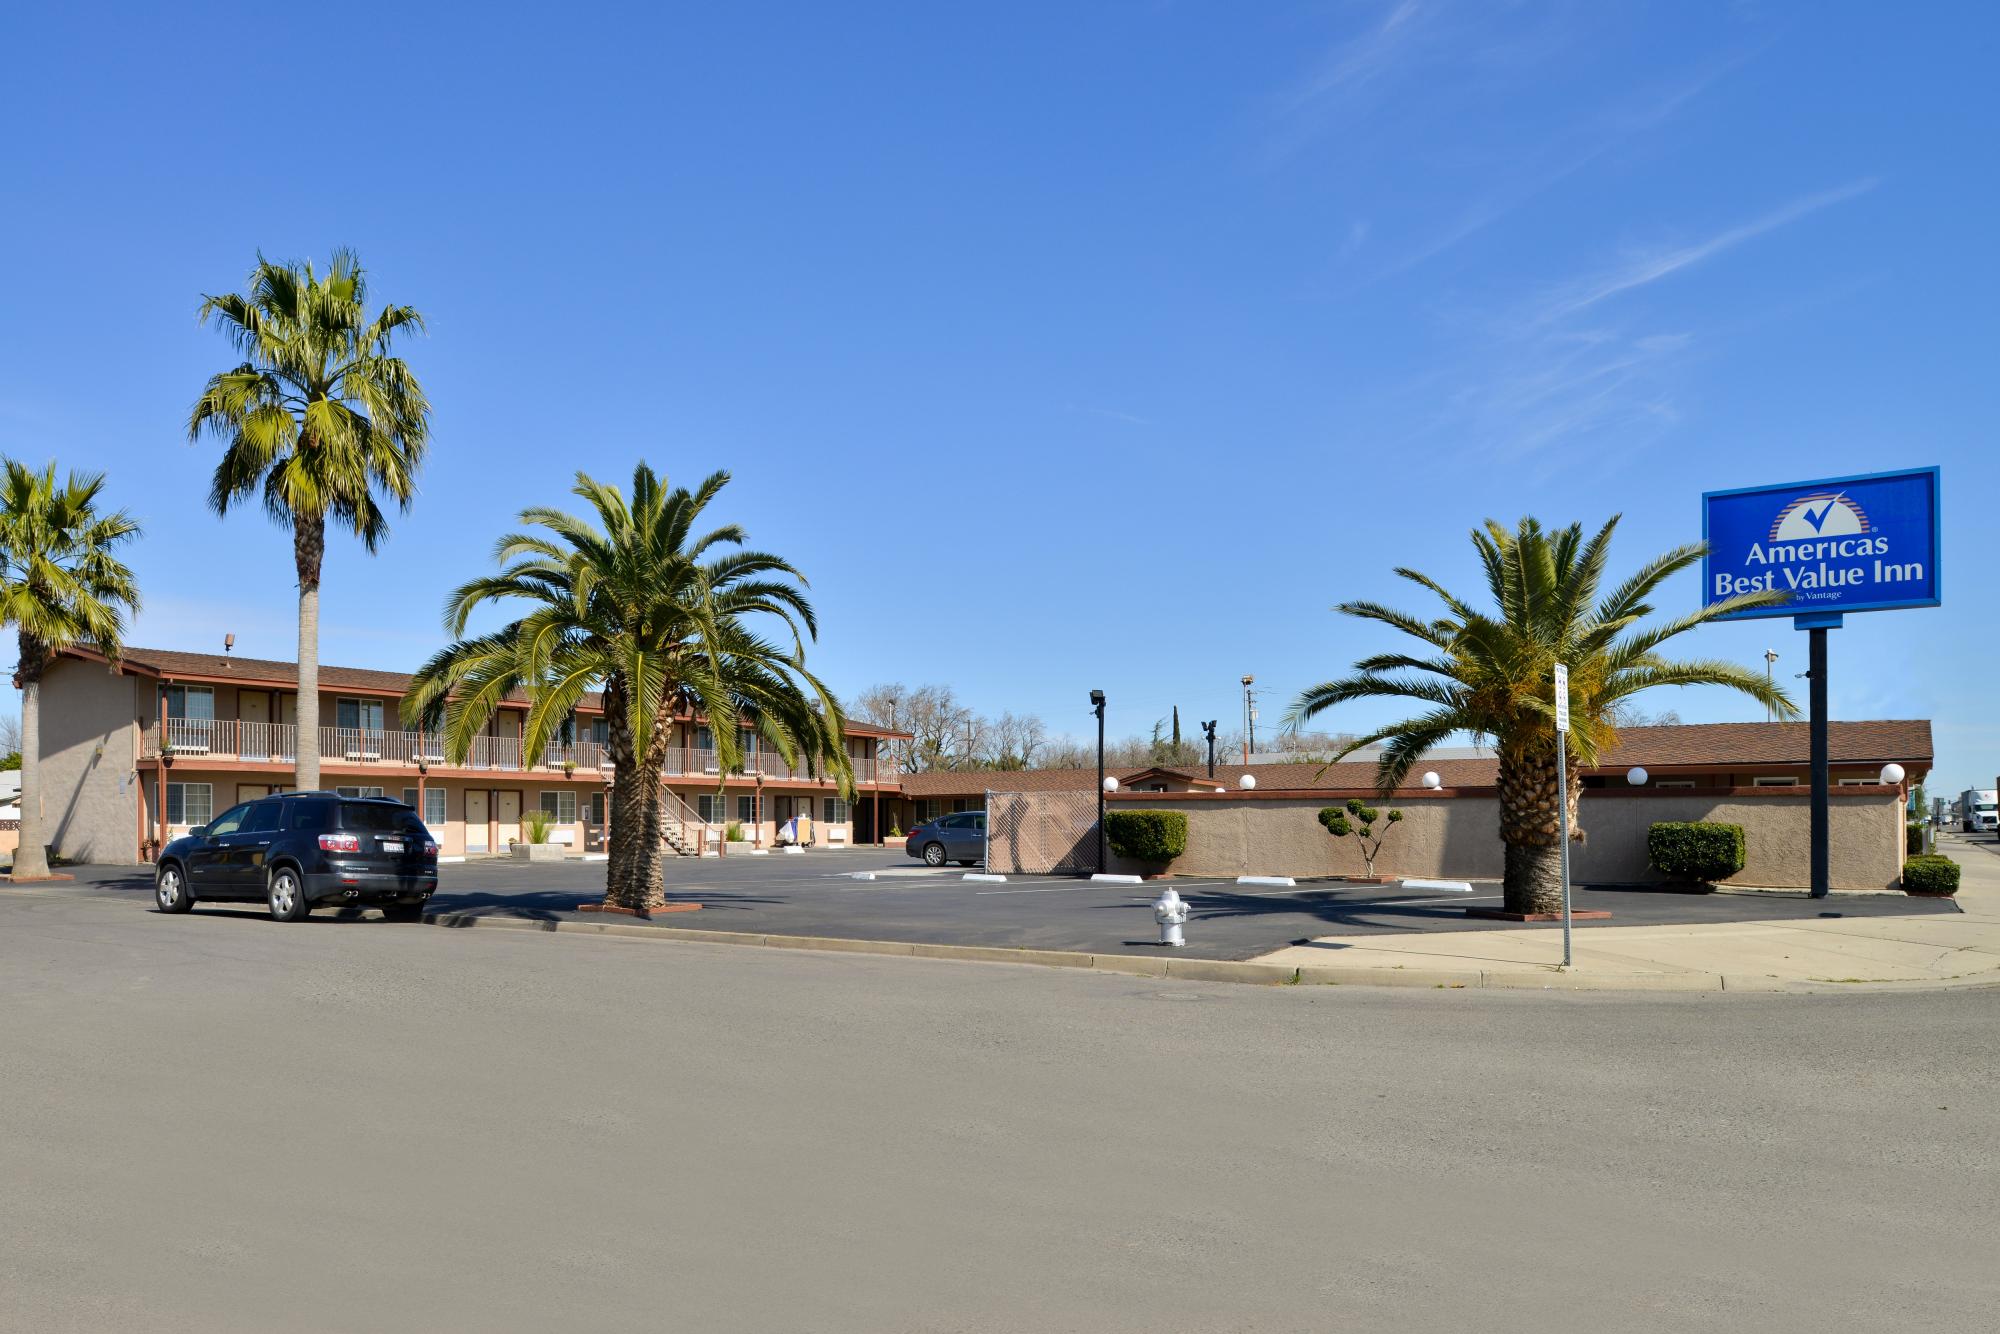 Street view of hotel exterior with palm trees and parking